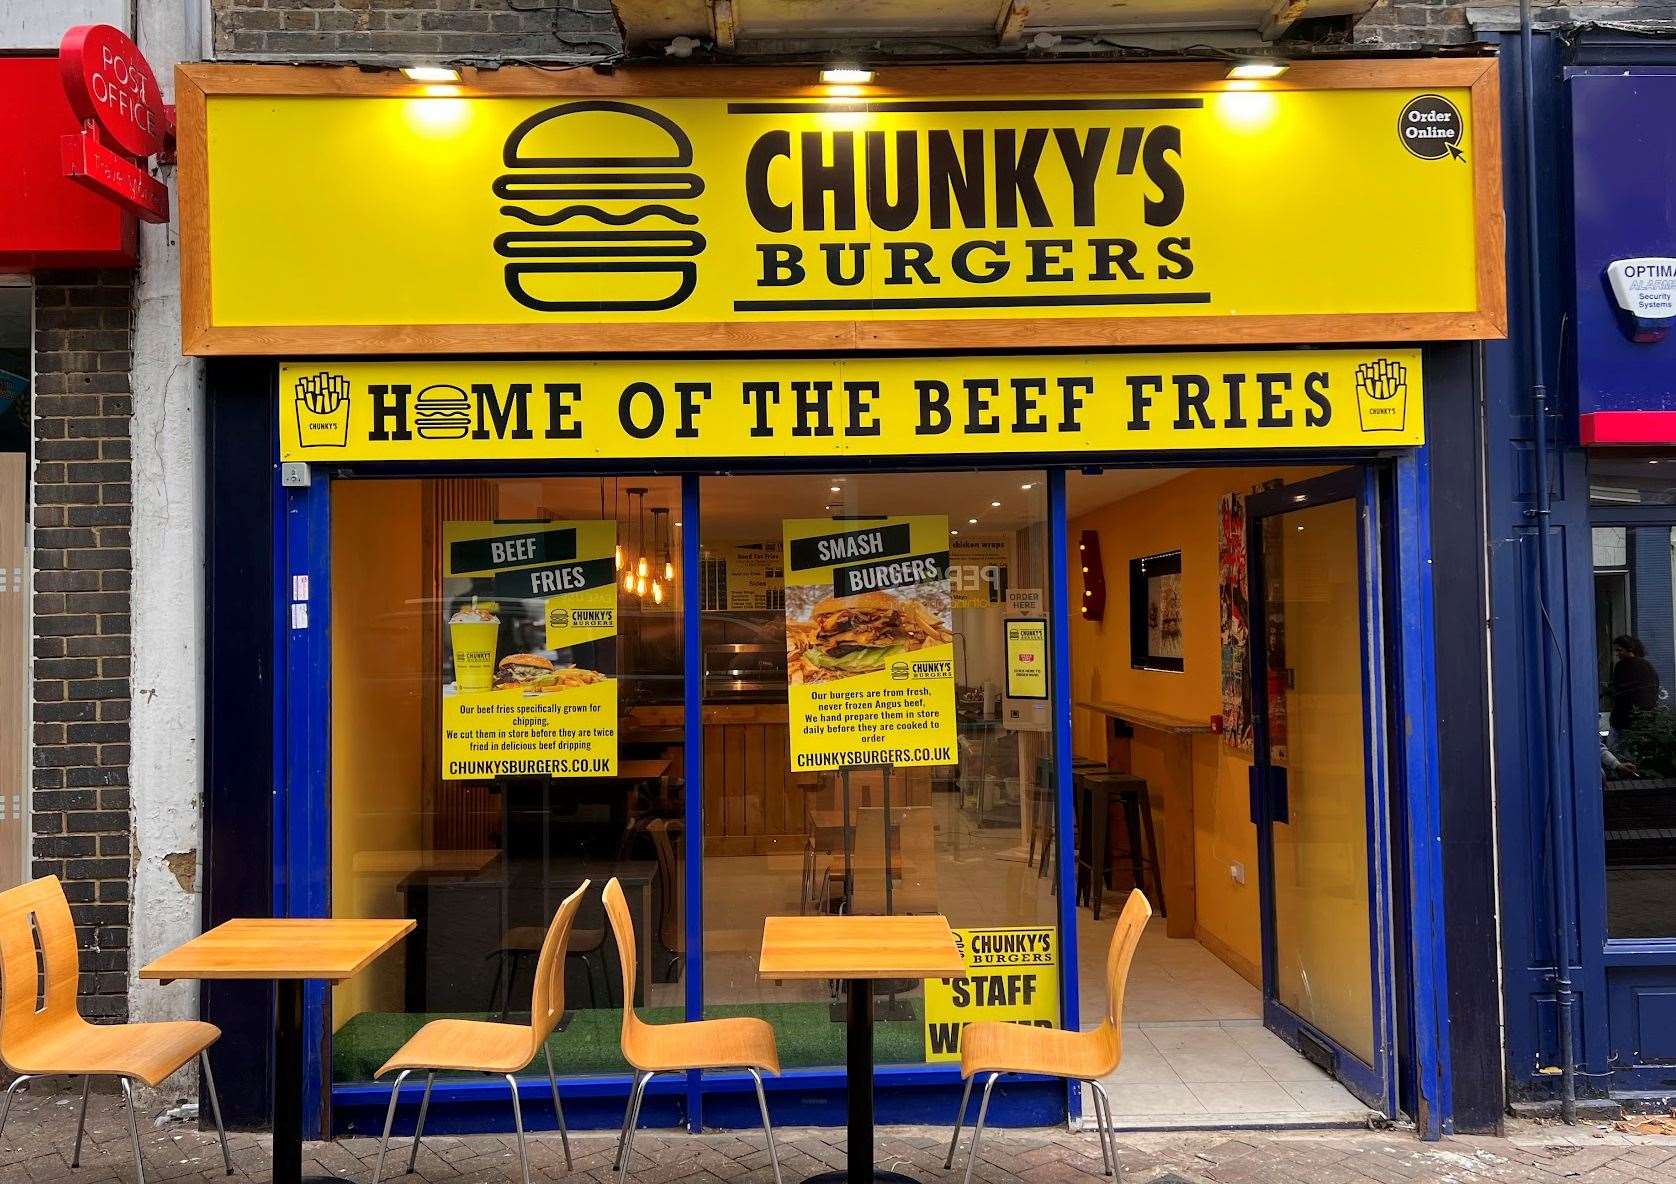 Chunky's Burgers is opening on Margate High Street this week. Picture: Sam Remblance